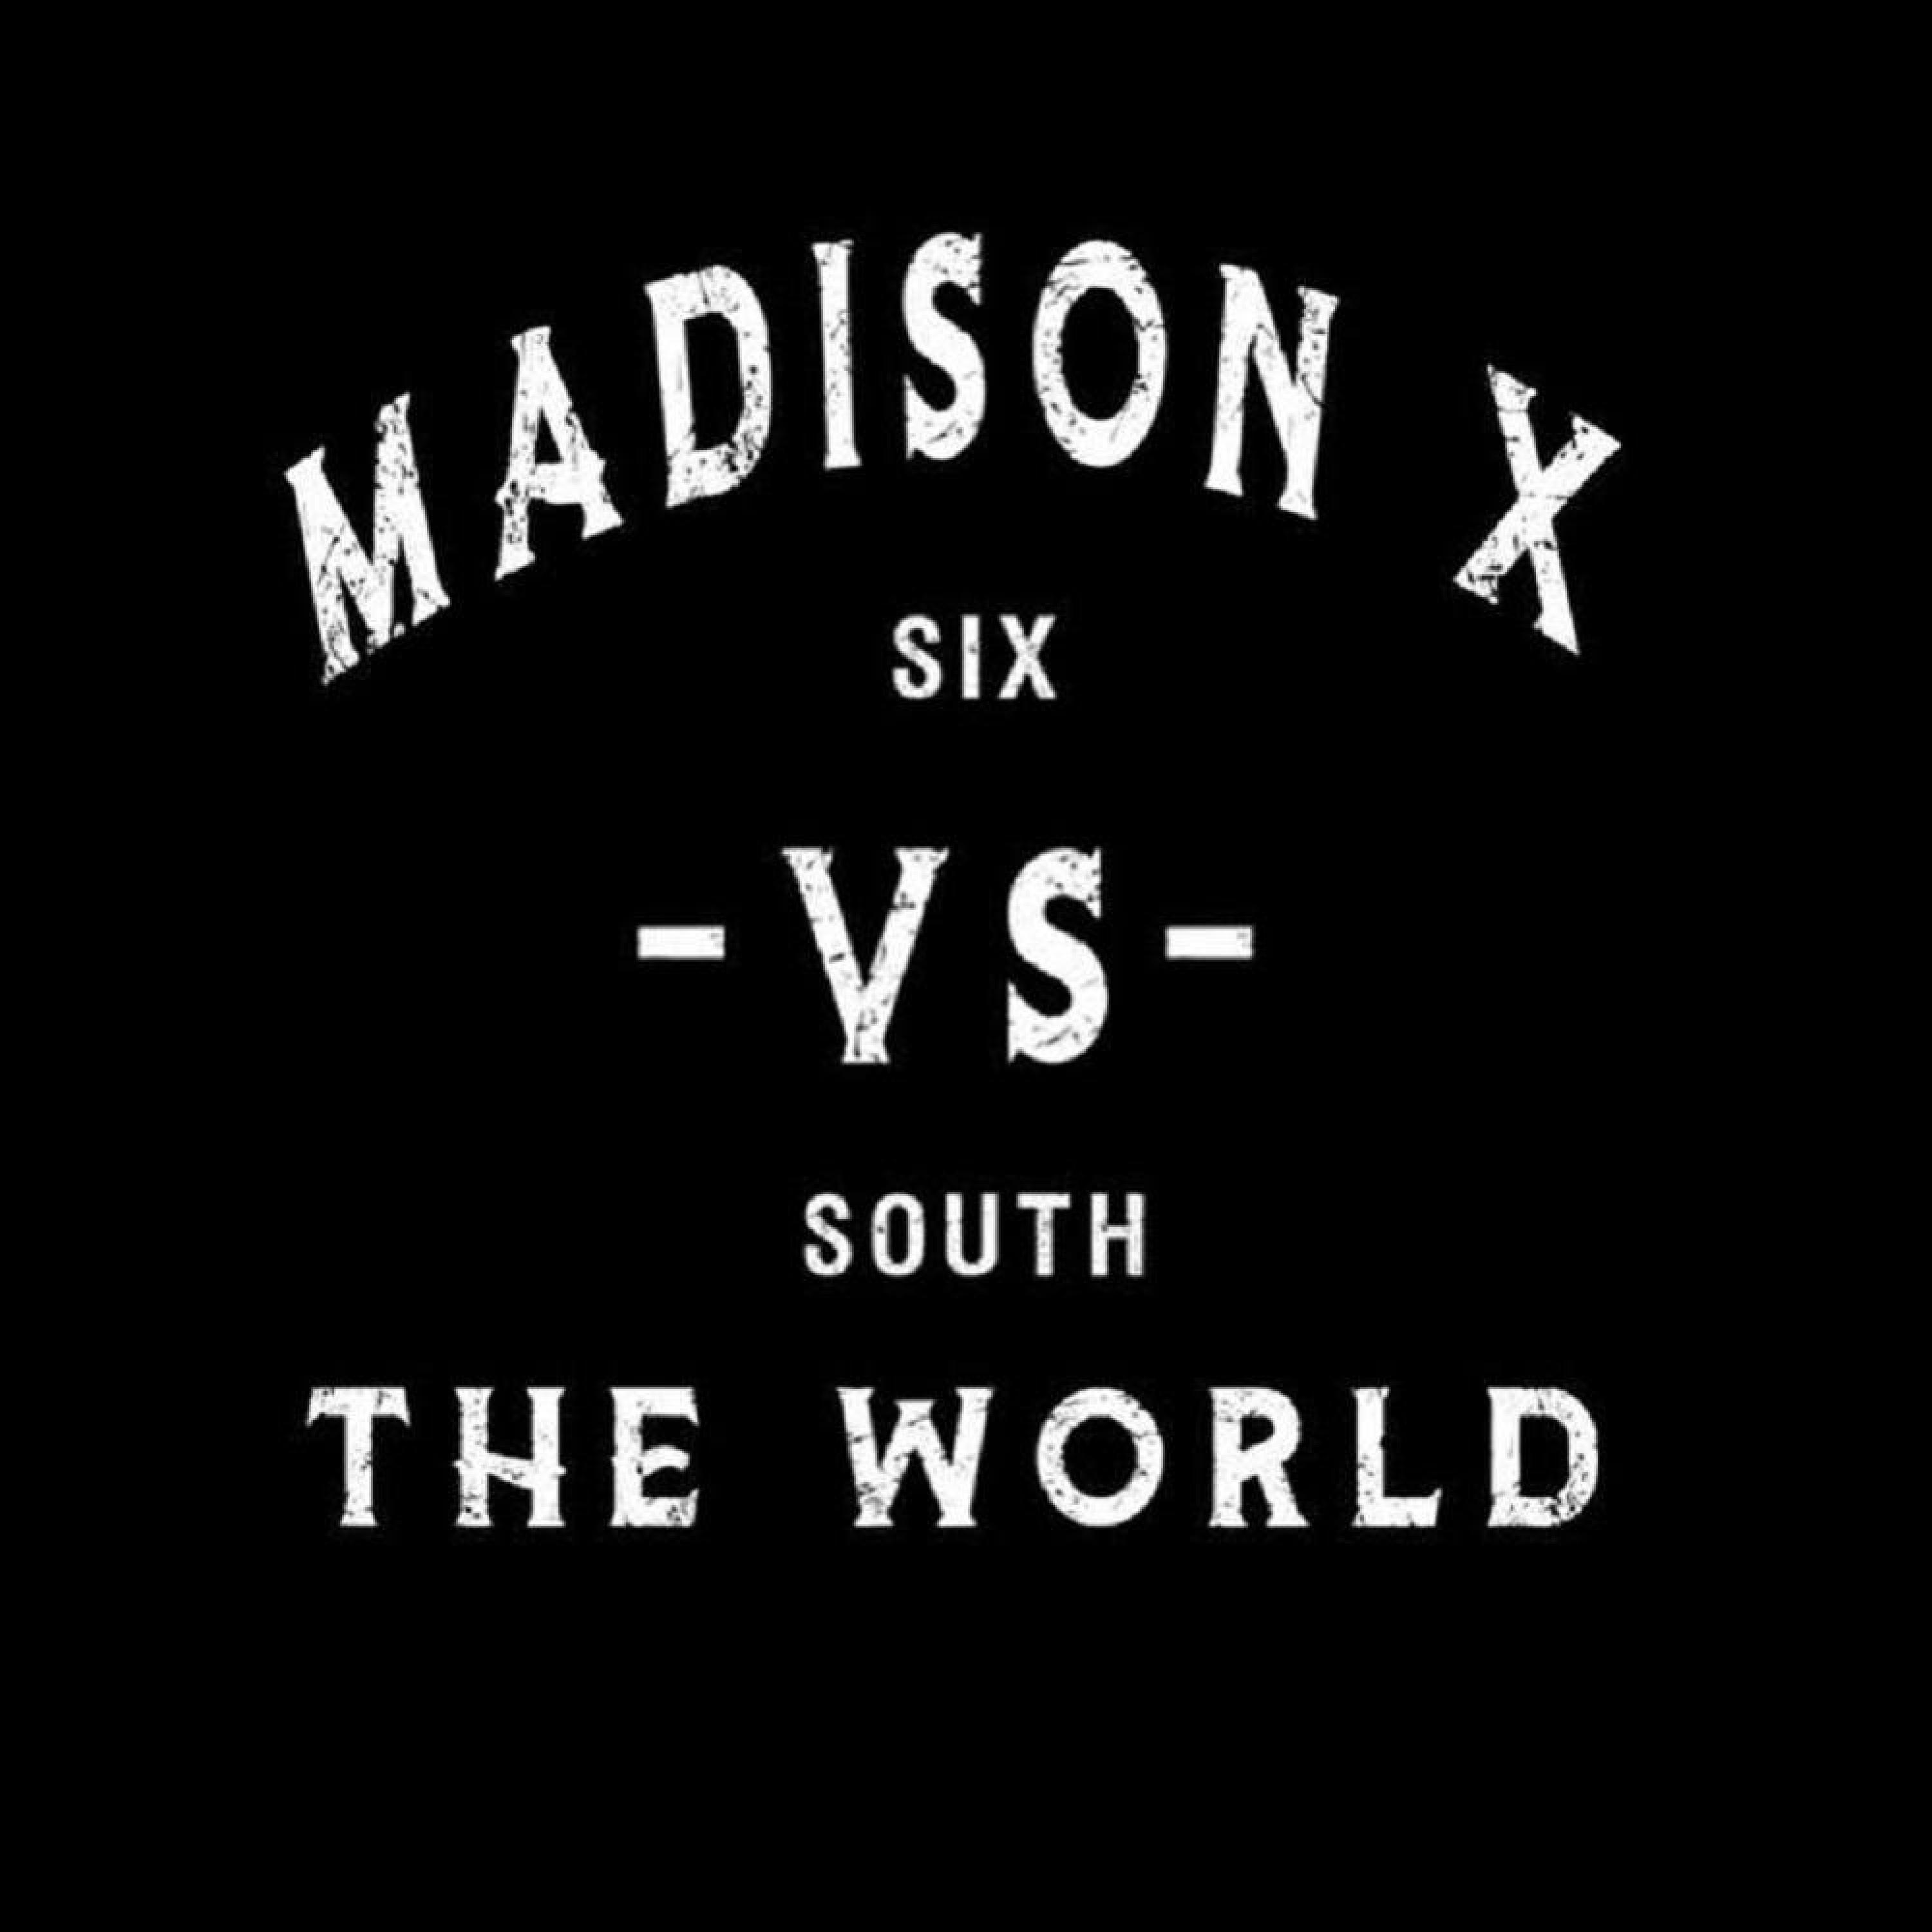 Madison X - THE HYPE